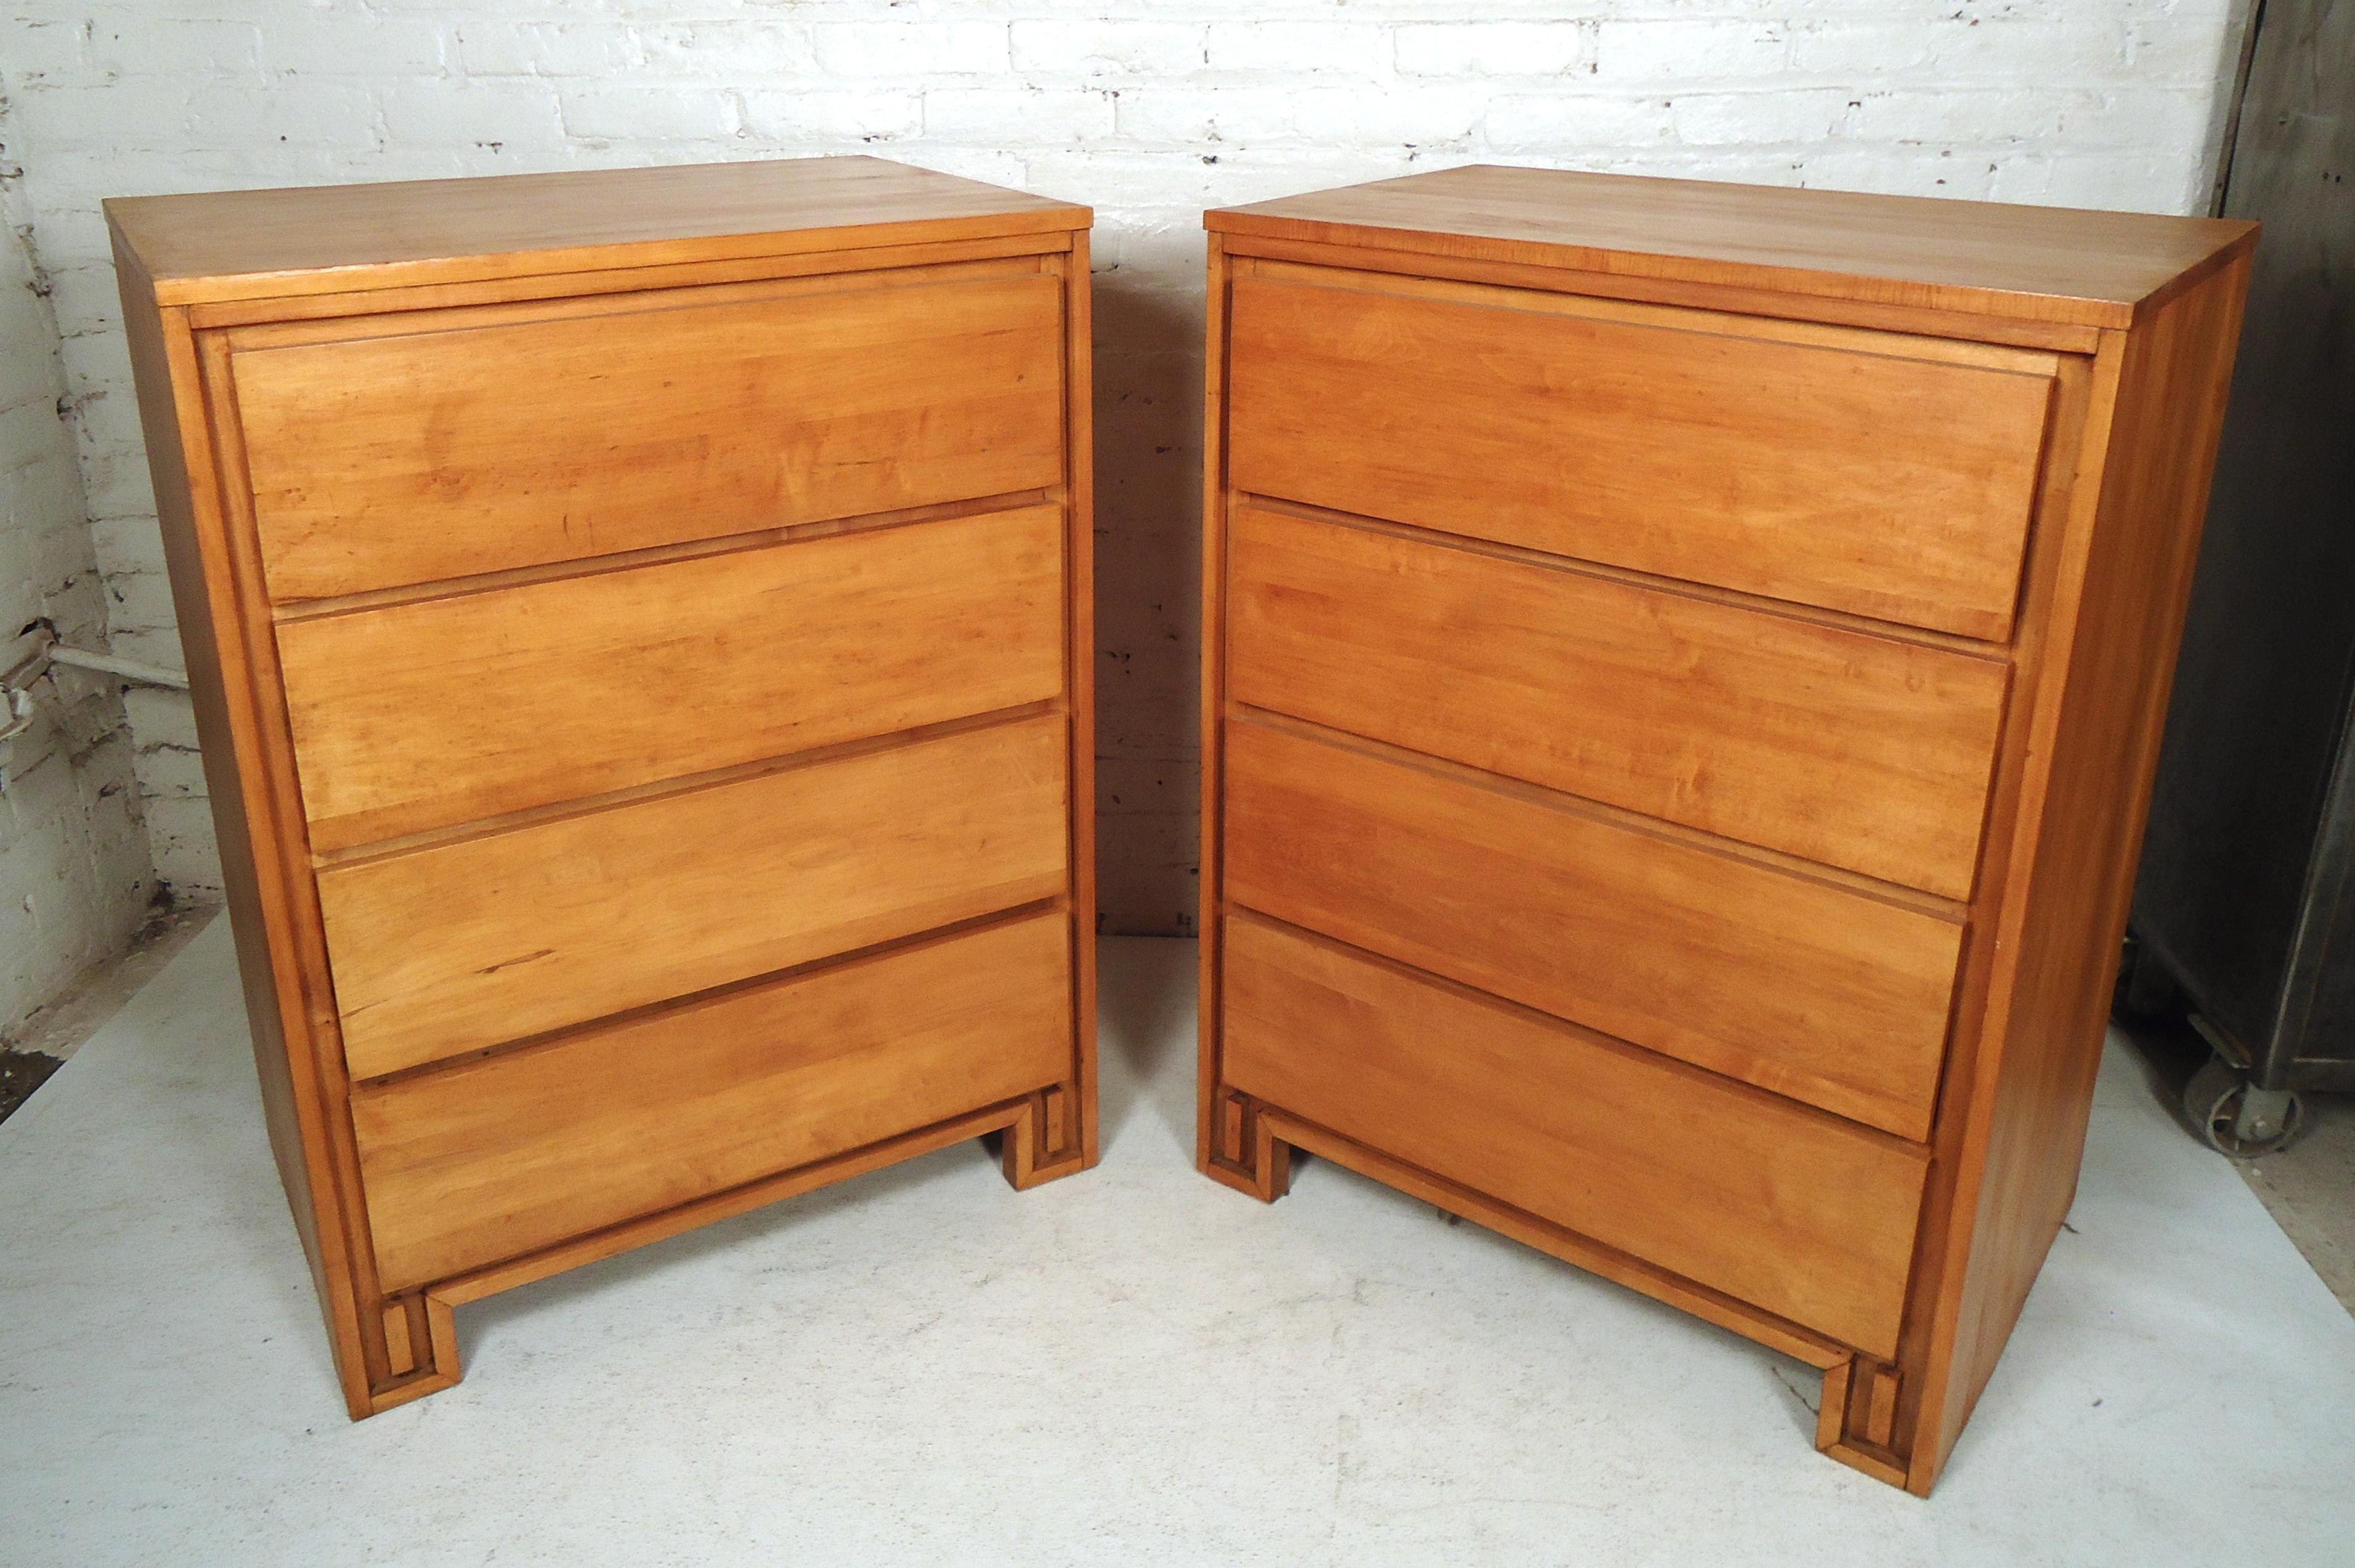 Gorgeous pair of Mid-Century Modern high boy dressers featuring maple wood grain, four drawers each, with a uniquely designed front base.

(Please confirm item location - NY or NJ - with dealer).